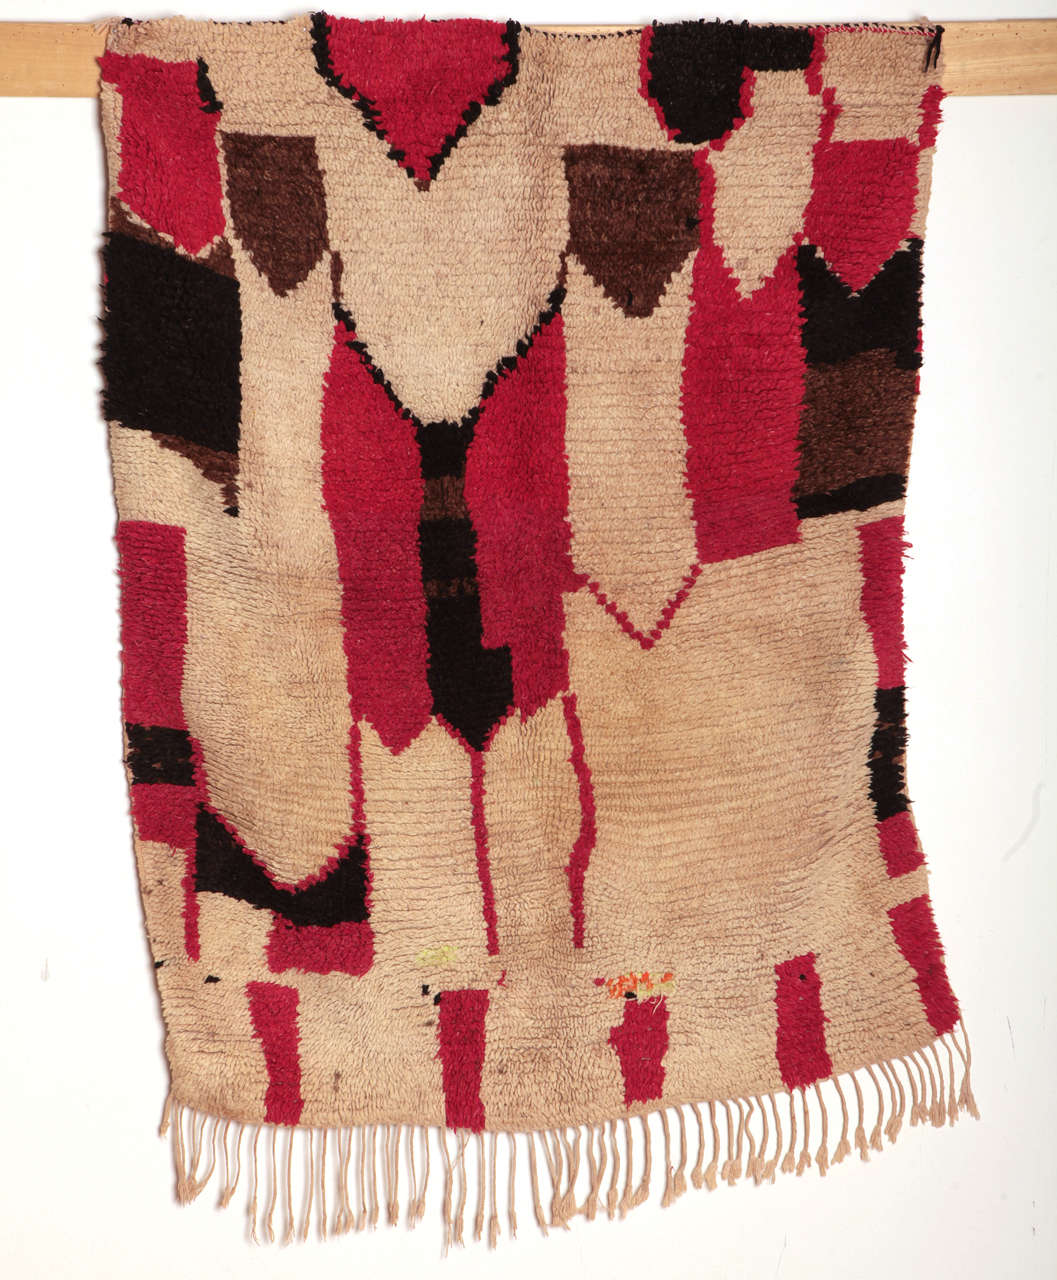 The Berber rugs from the Azilal region, located in the Moroccan Central High Atlas, are among the most Primitive North African tribal weavings. Their Minimalist designs are accentuated by a limited palette of strongly contrasting colours, like in